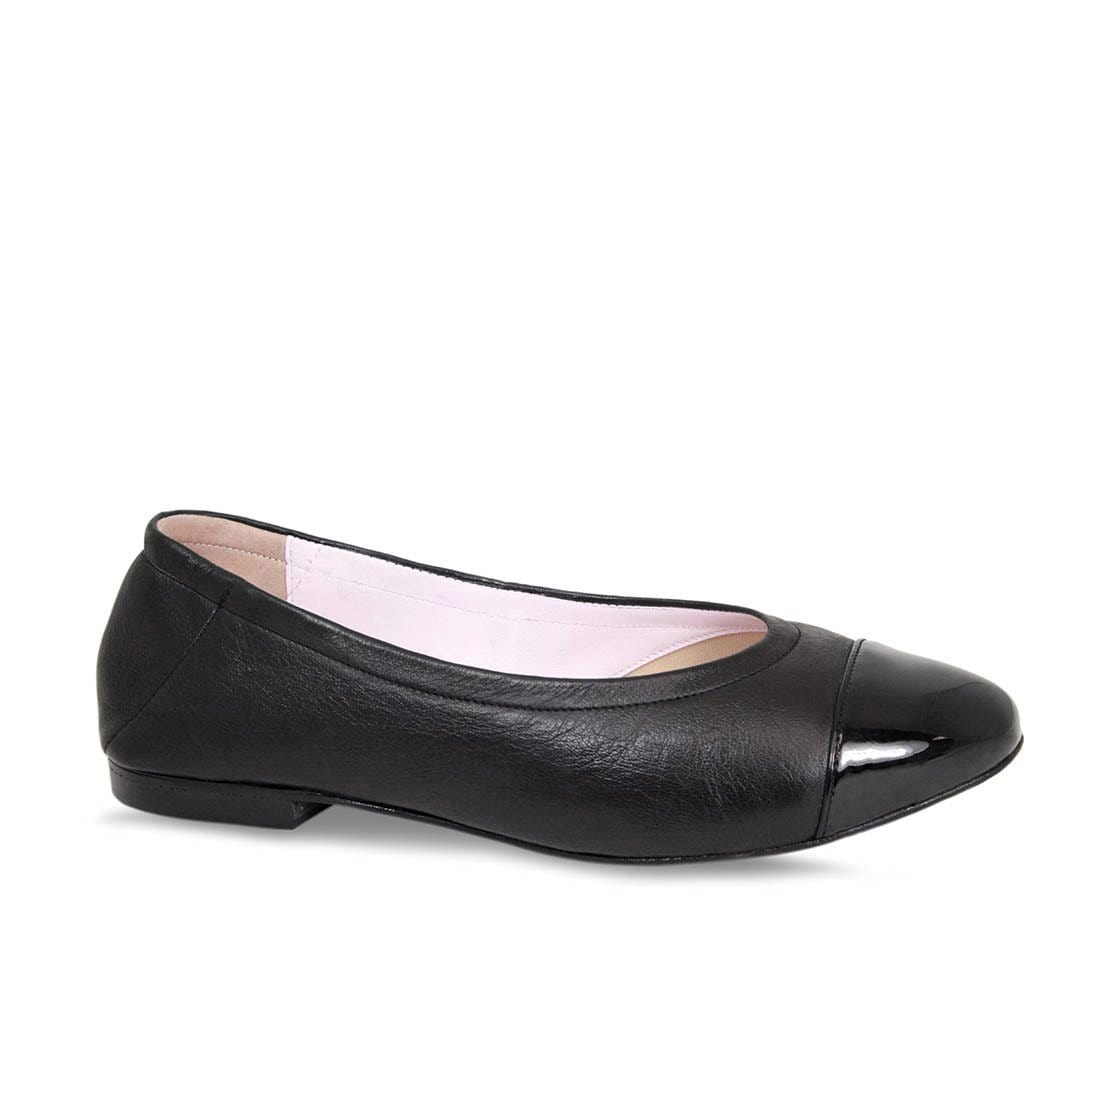 Luna: Black Leather – Stylish Ballet Flats for Bunions – Sole